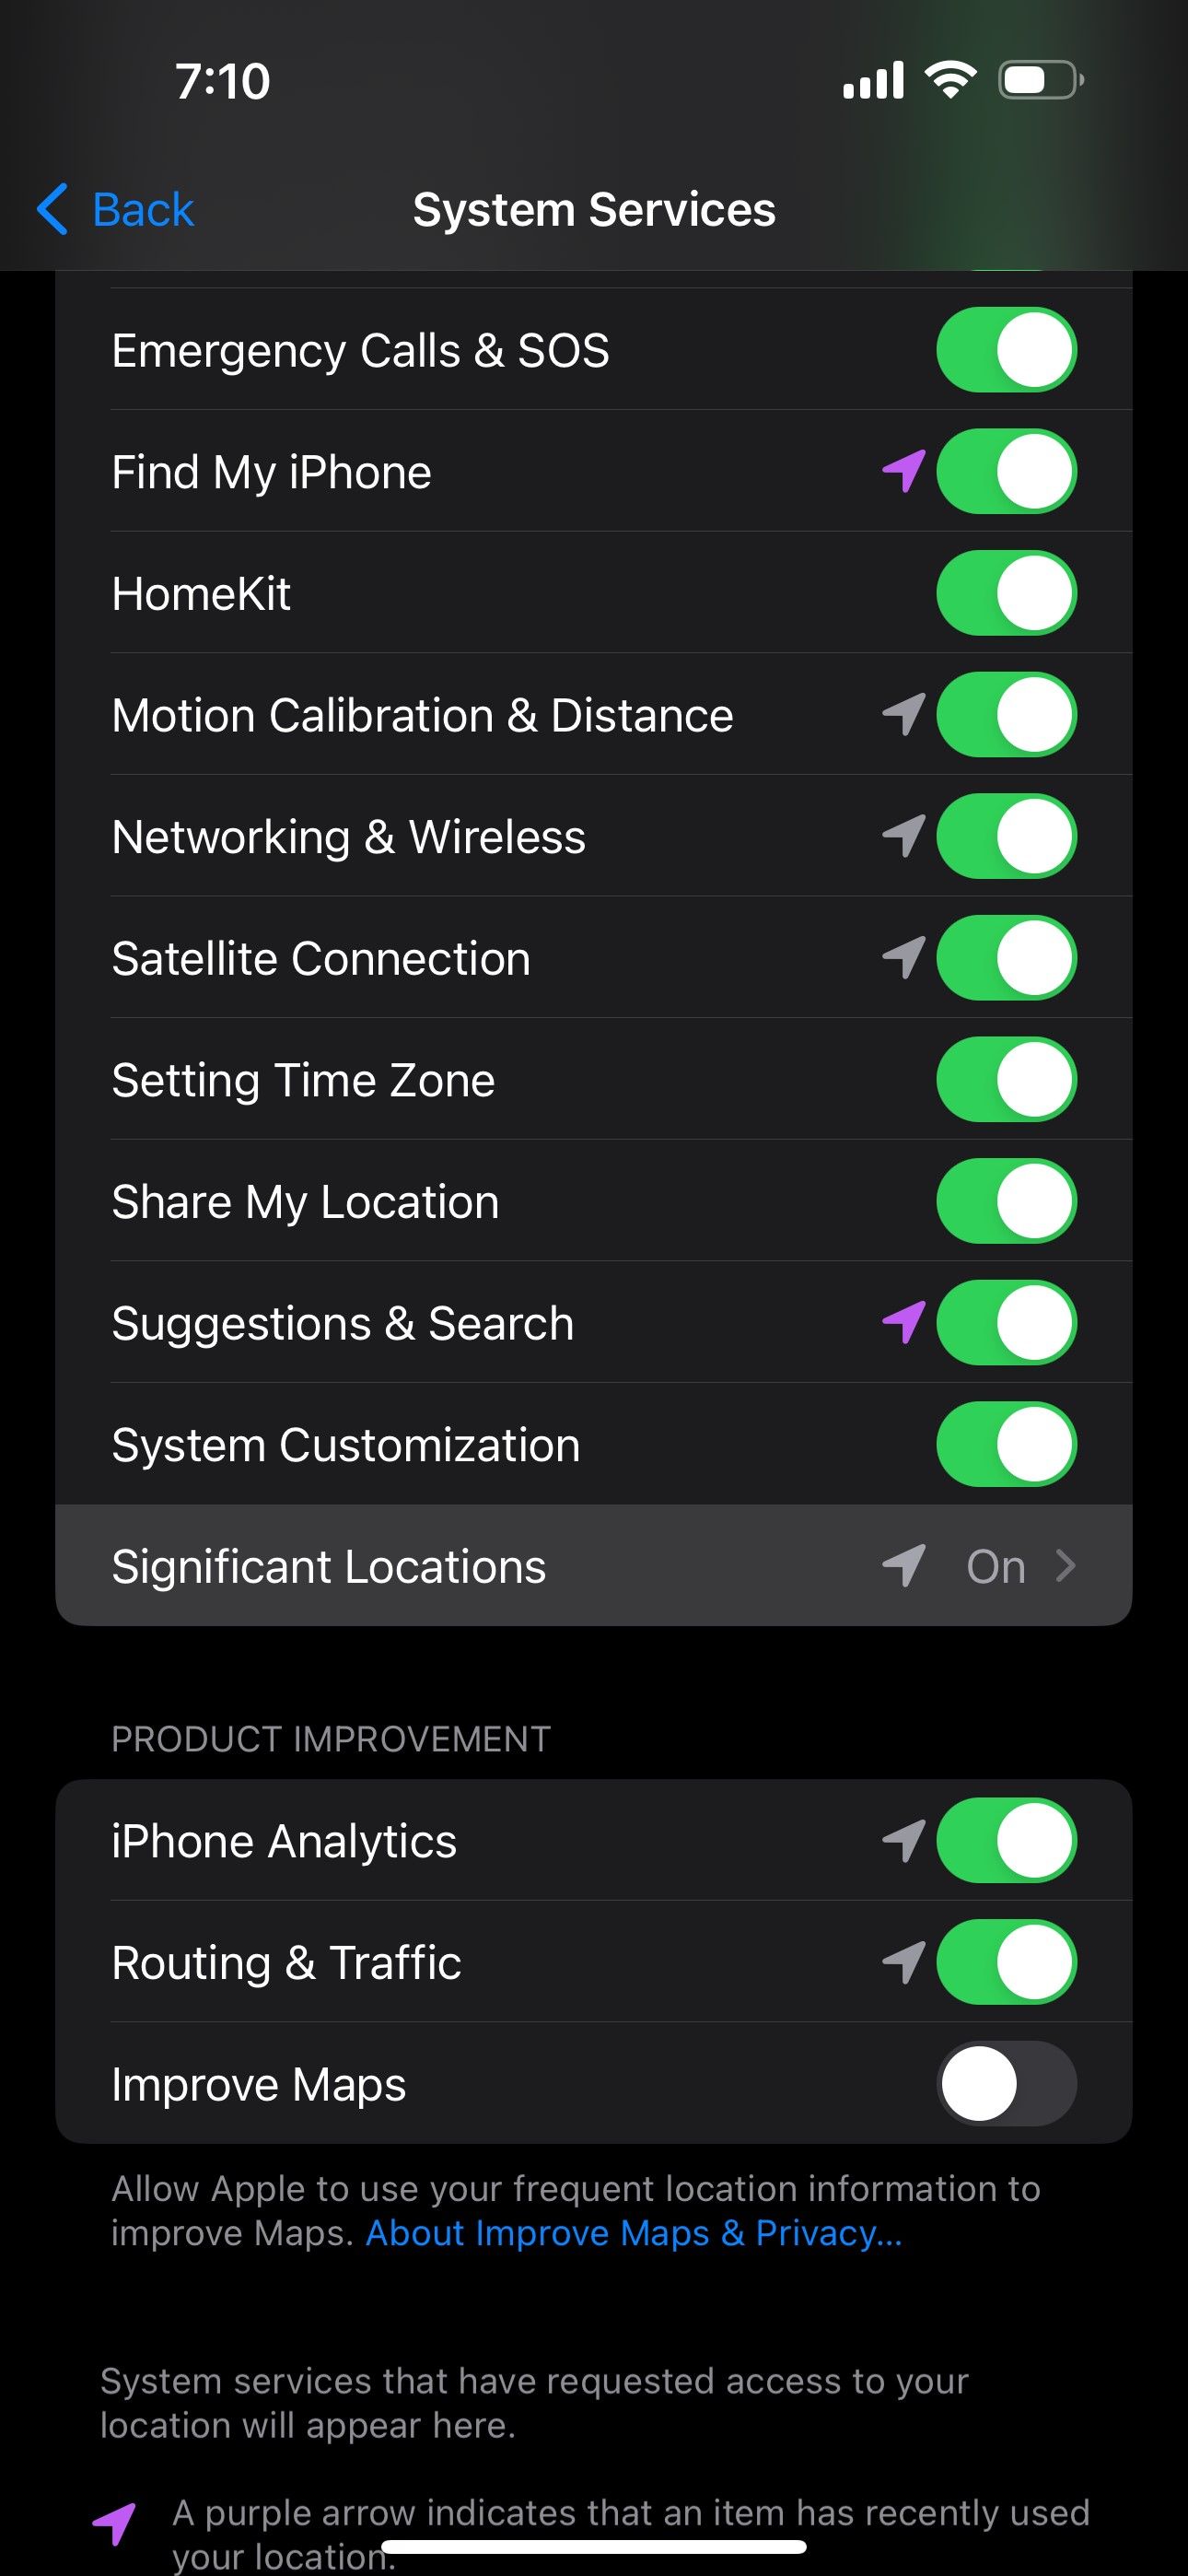 System Services screen including Significant Locations